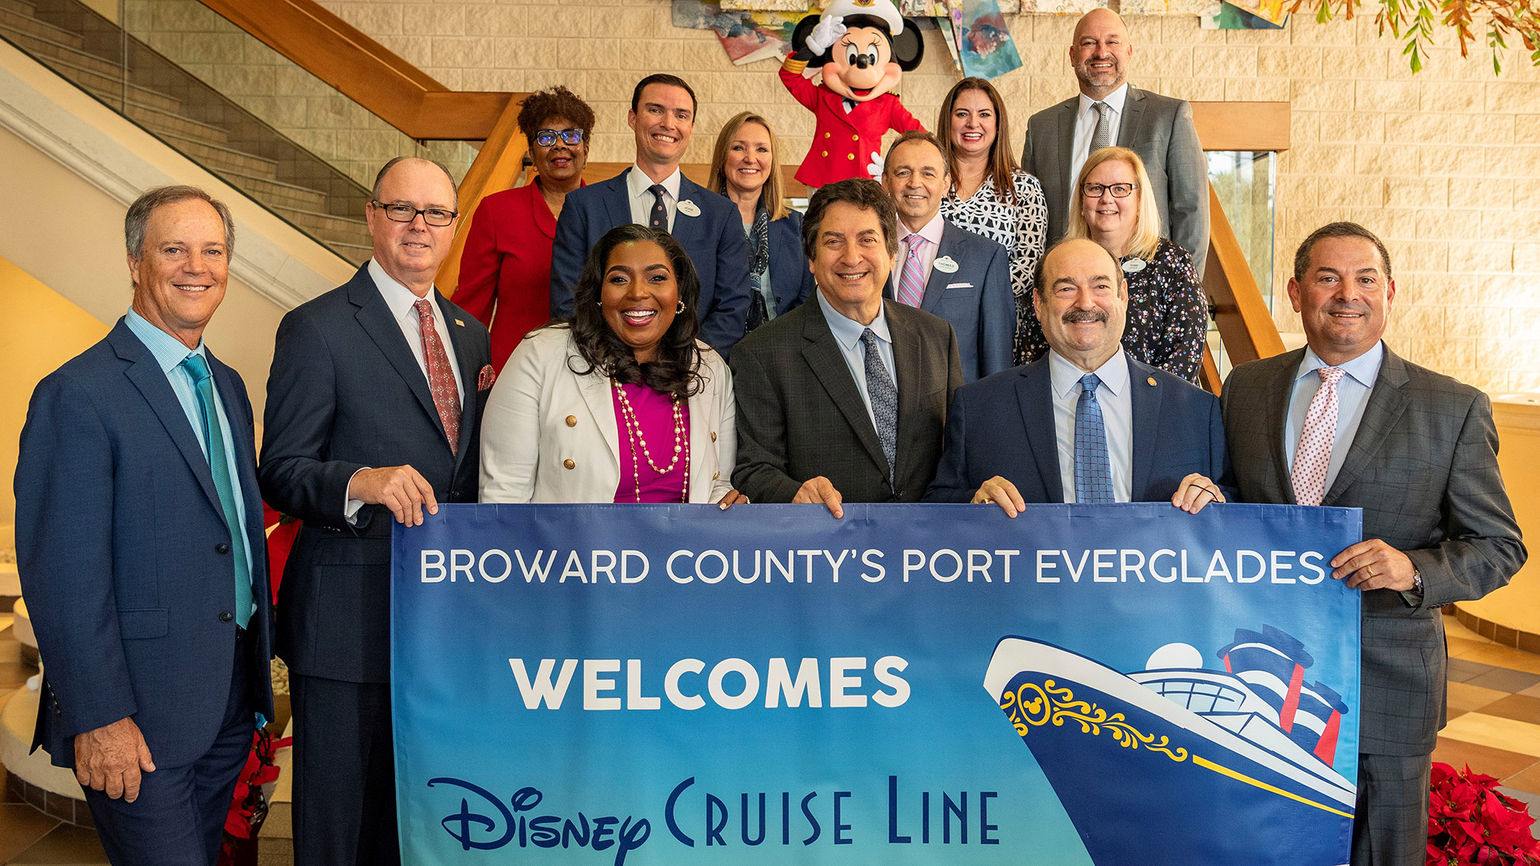 Disney Cruise Line reaches deal with Port Everglades